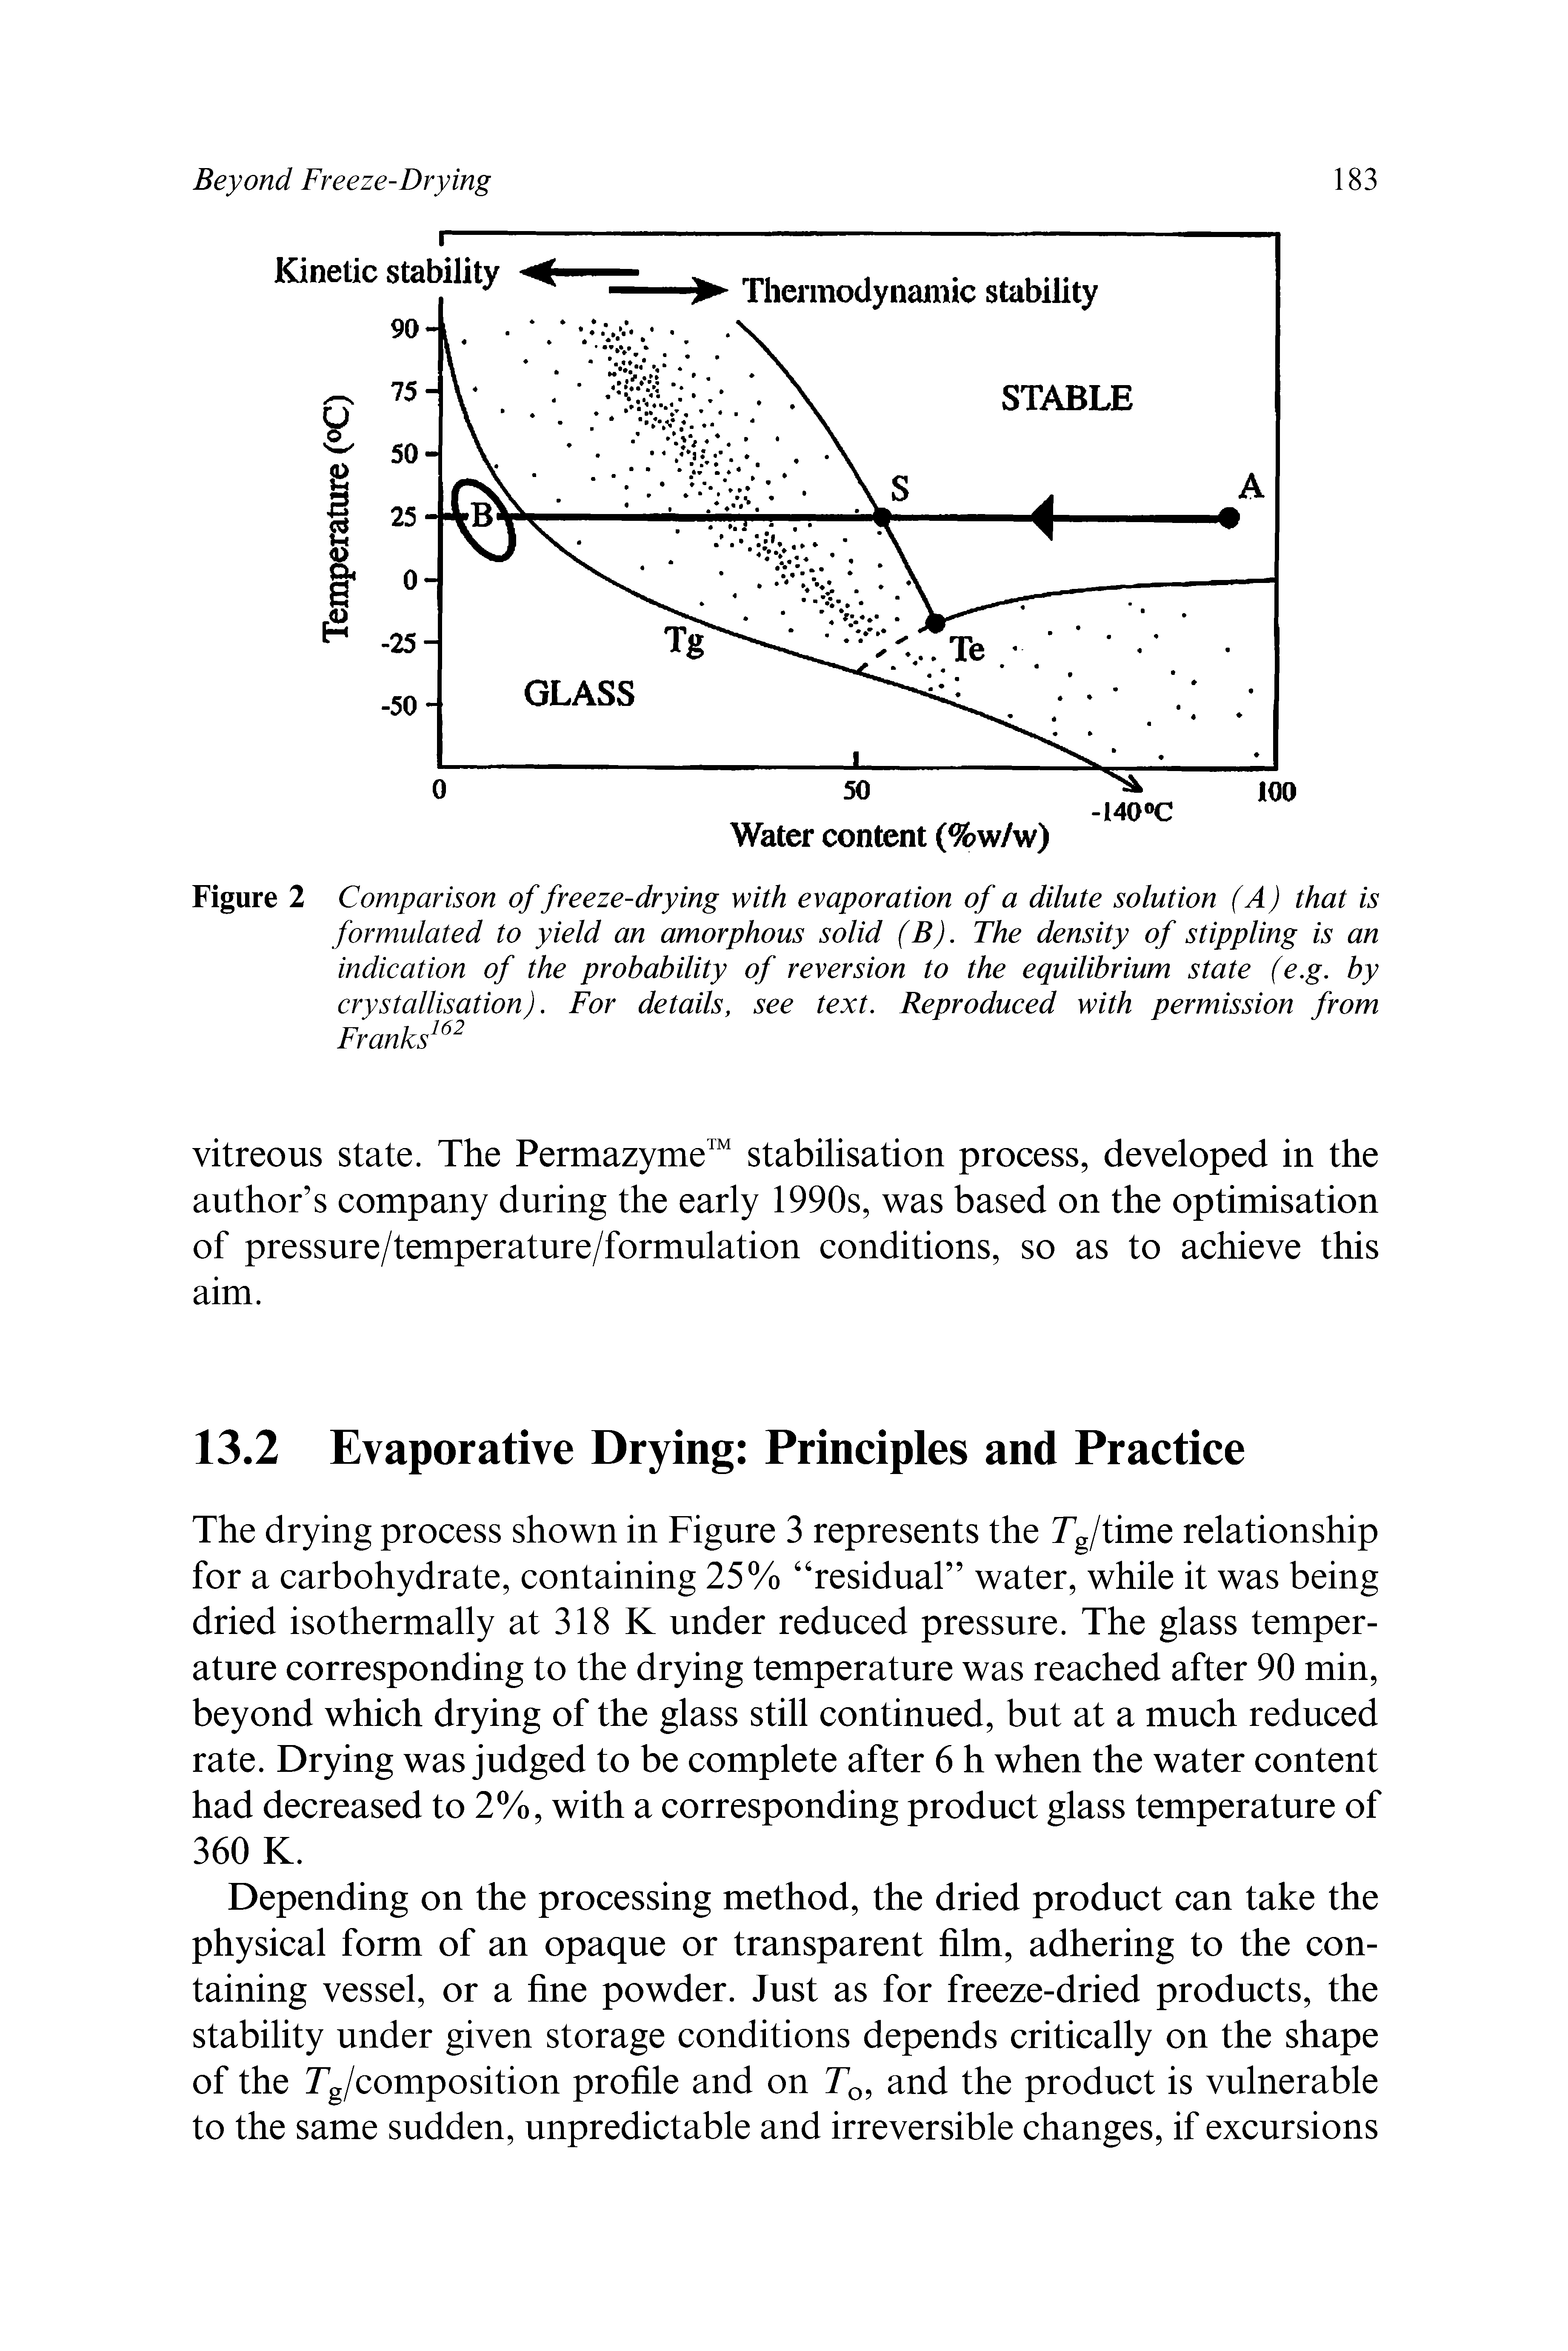 Figure 2 Comparison of freeze-drying with evaporation of a dilute solution (A) that is formulated to yield an amorphous solid (B). The density of stippling is an indication of the probability of reversion to the equilibrium state (e.g. by crystallisation). For details, see text. Reproduced with permission from...